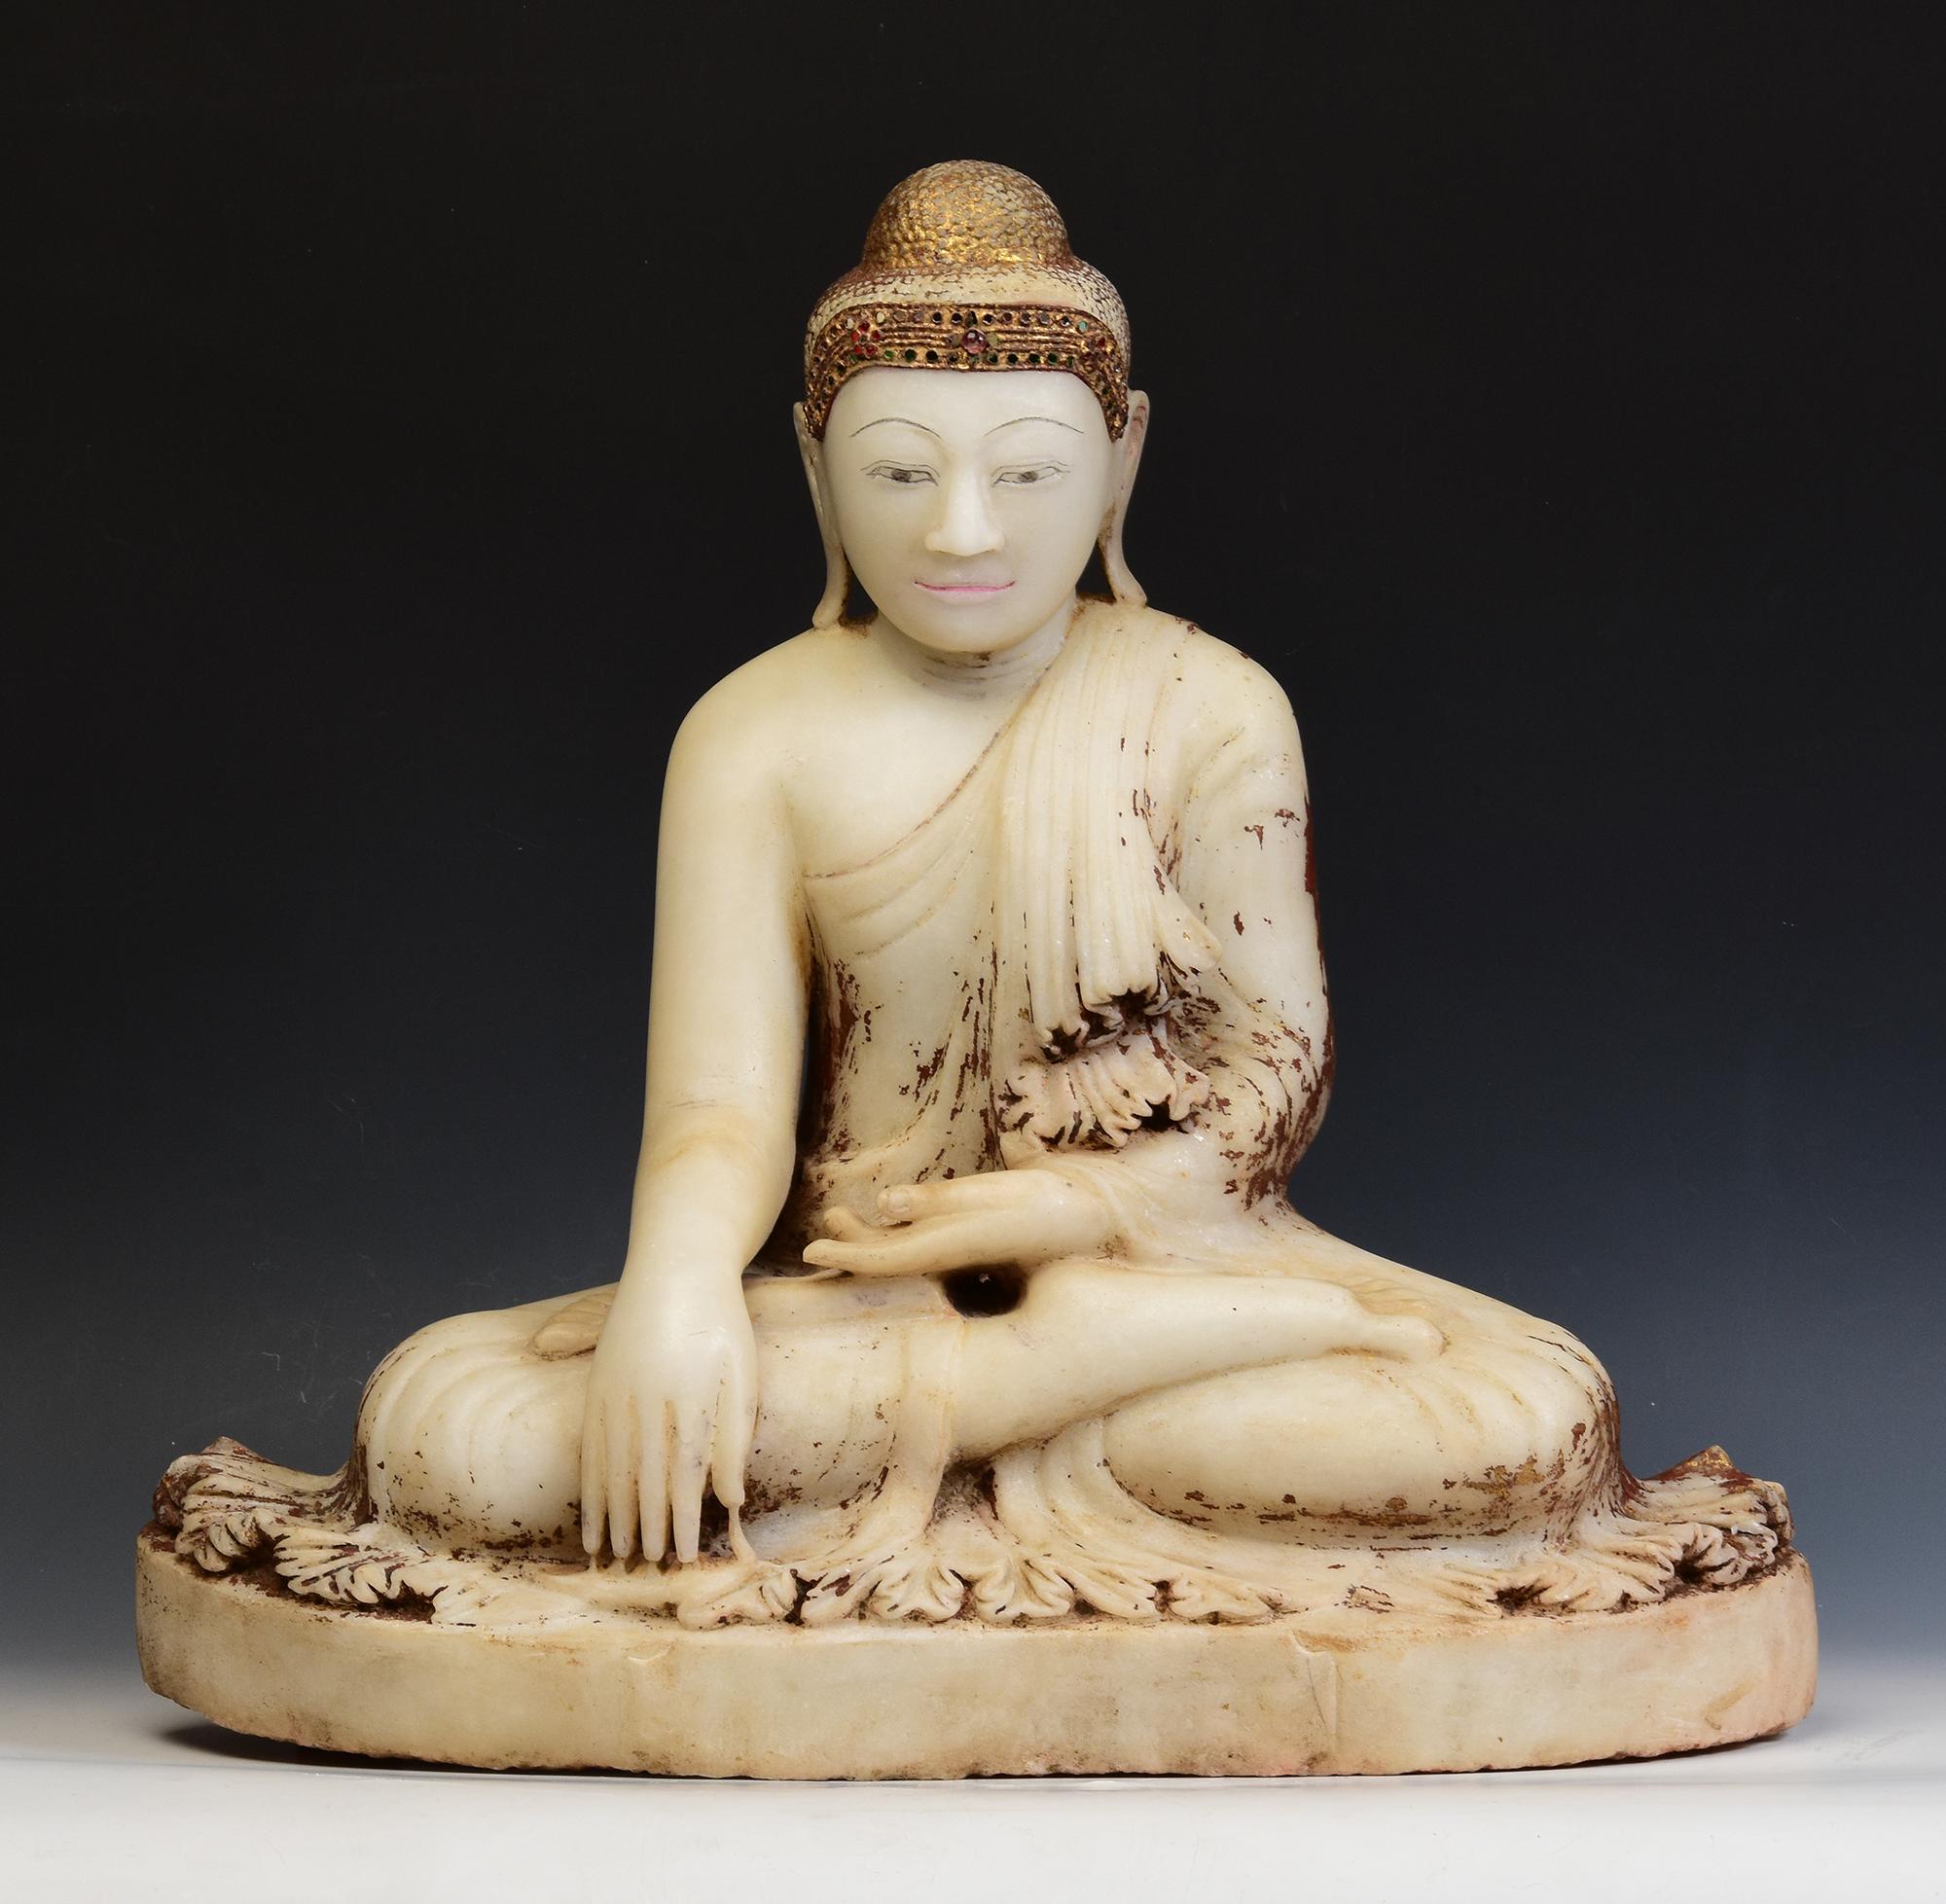 Antique Burmese alabaster Buddha sitting in Mara Vijaya (calling the earth to witness) posture on a base, with inlay of colorful glass pieces on the headband.

Age: Burma, Mandalay Period, 19th Century
Size: Height 52.3 C.M. / Width 55 C.M. / Depth